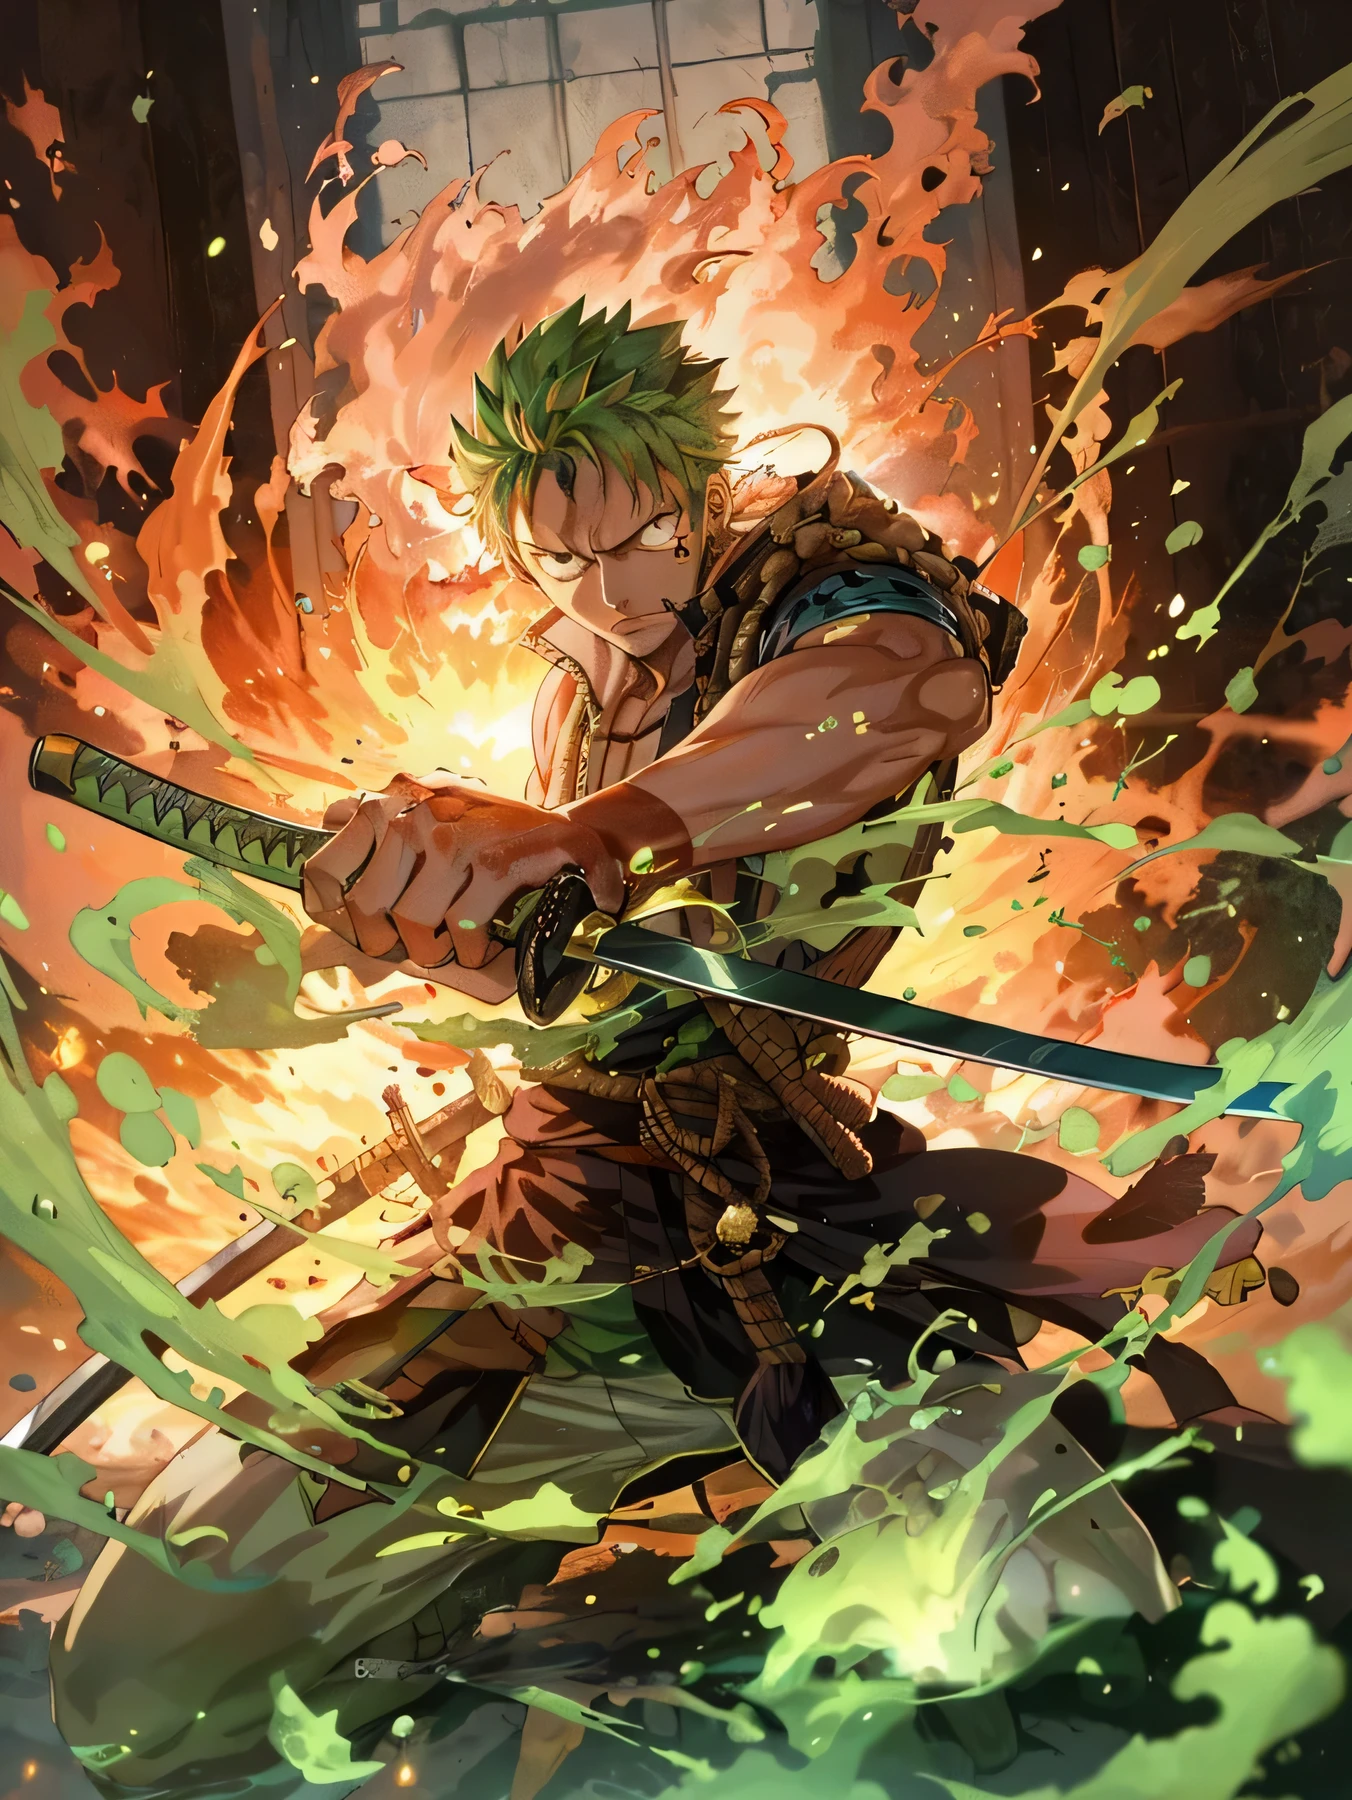 Cartoon image of a green-haired man holding a sword, Roronoa Zoro, offcial art, hq artwork, one piece art style, official fanart, from one piece, o - yoroi, Official anime artwork, Green fire, One Piece, Official artwork, Anime epic artwork, blazing infero, hd artwork, An anime cover, key art, anime wallaper